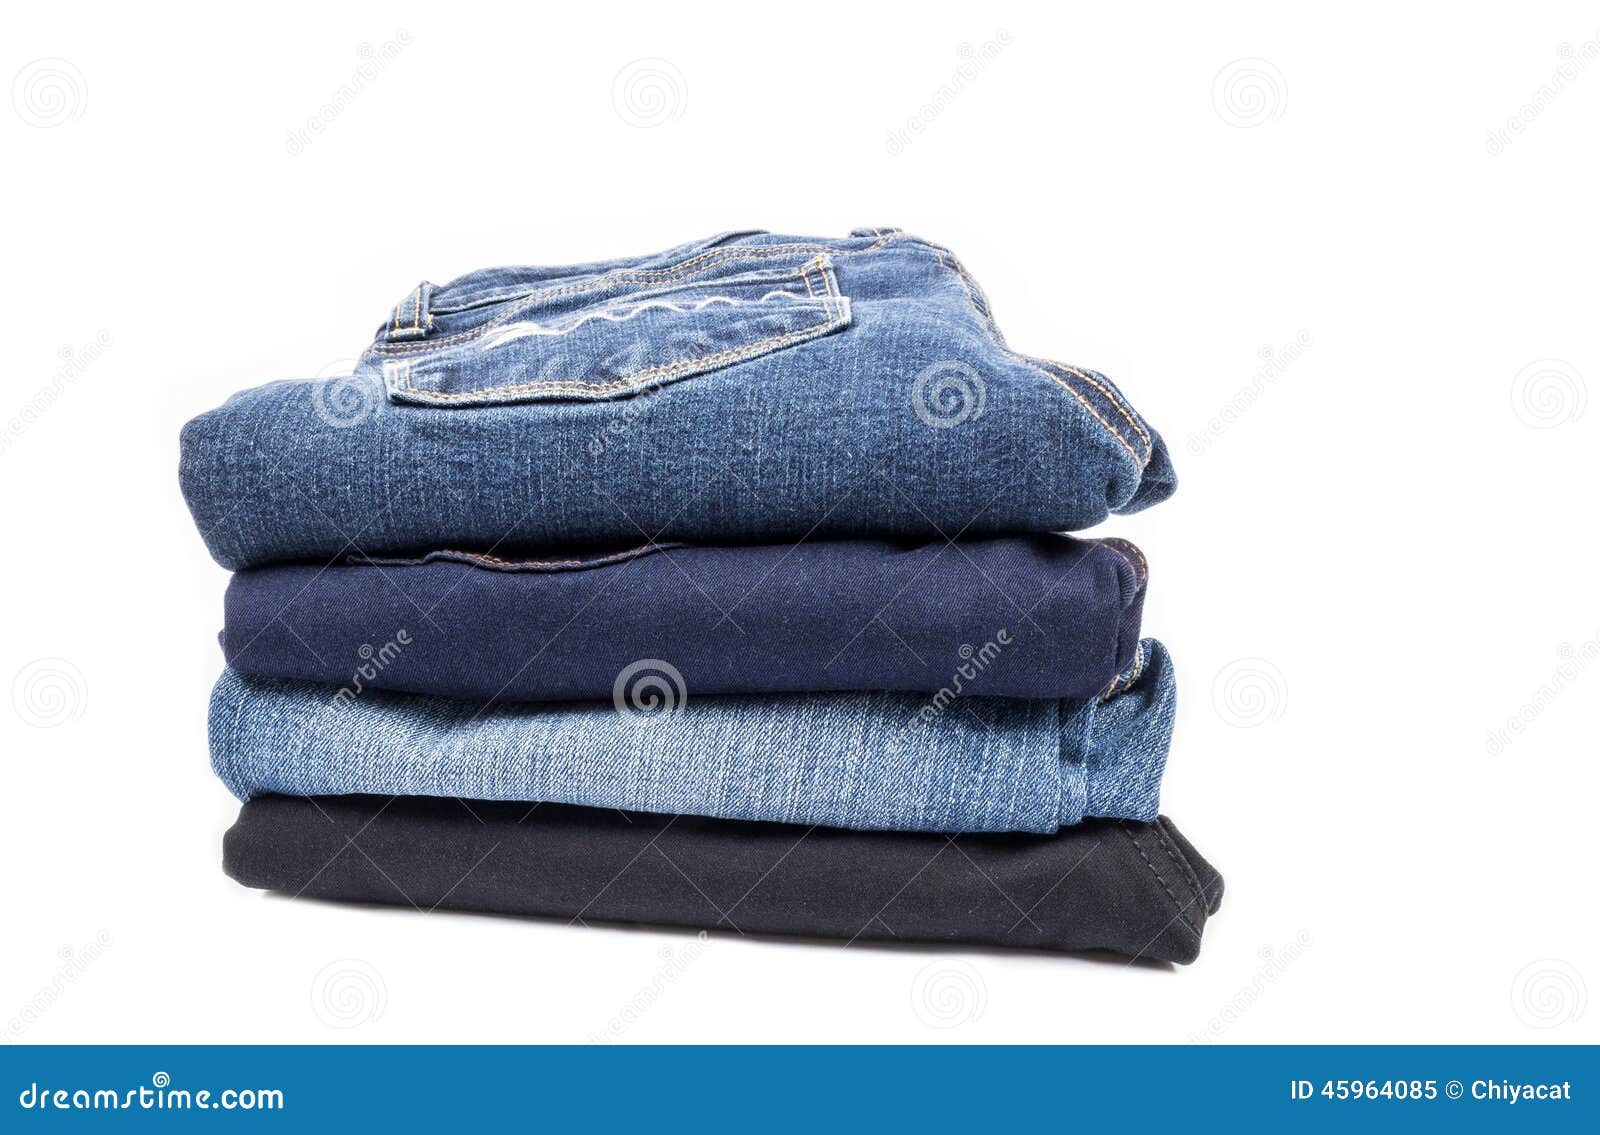 Stack of Jeans #2 stock image. Image of casual, fashion - 45964085